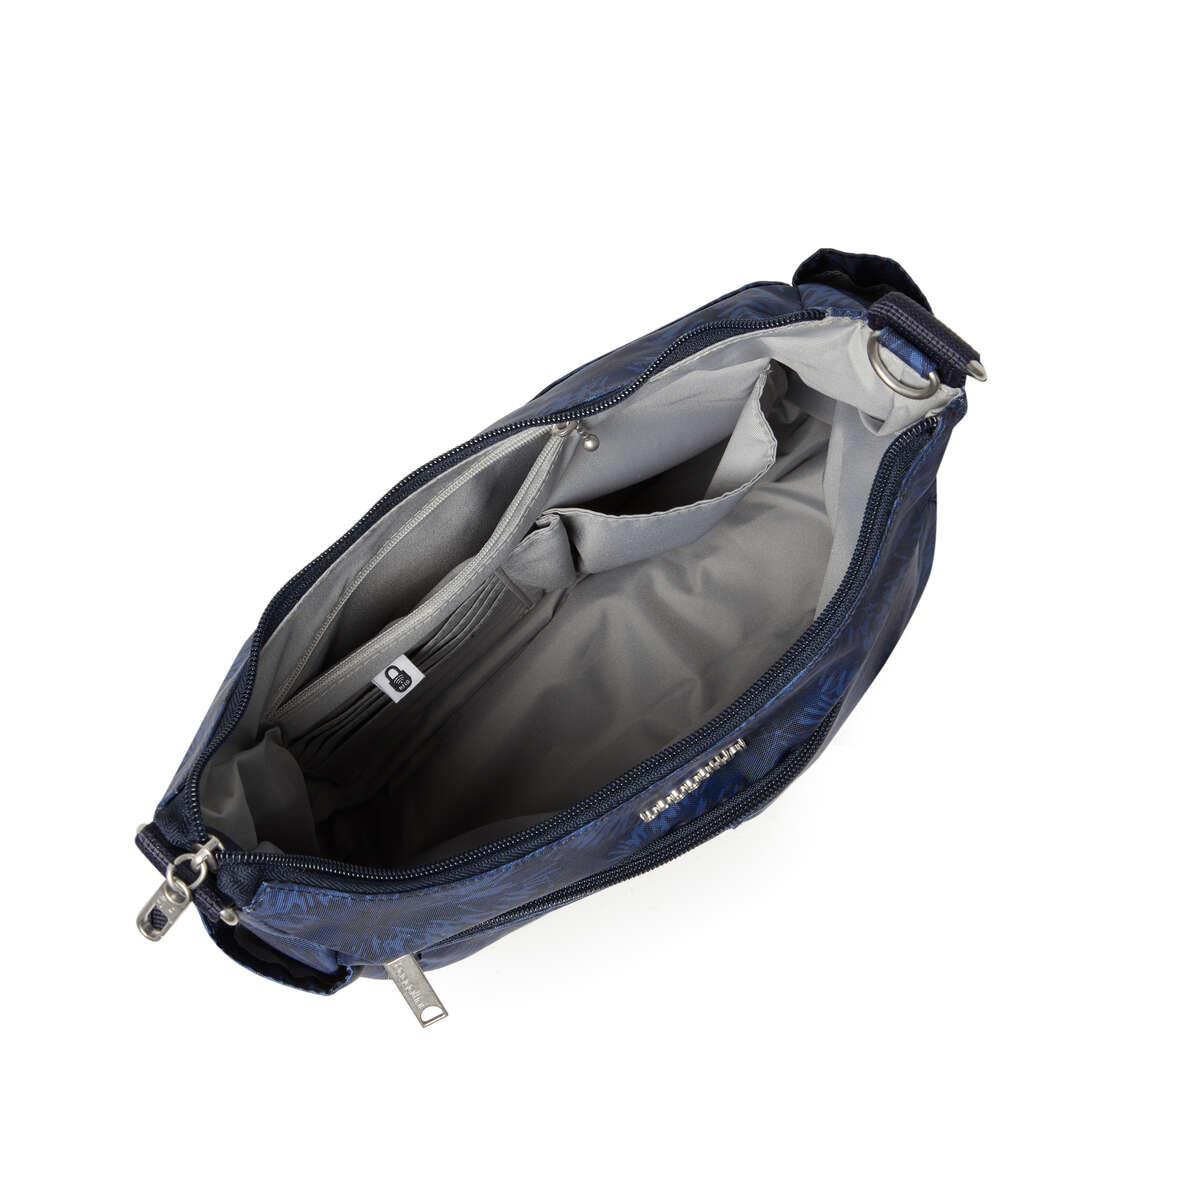 opened bag with interior space and pockets visible Baggallini Anti-Theft Free Time - French Navy Firework